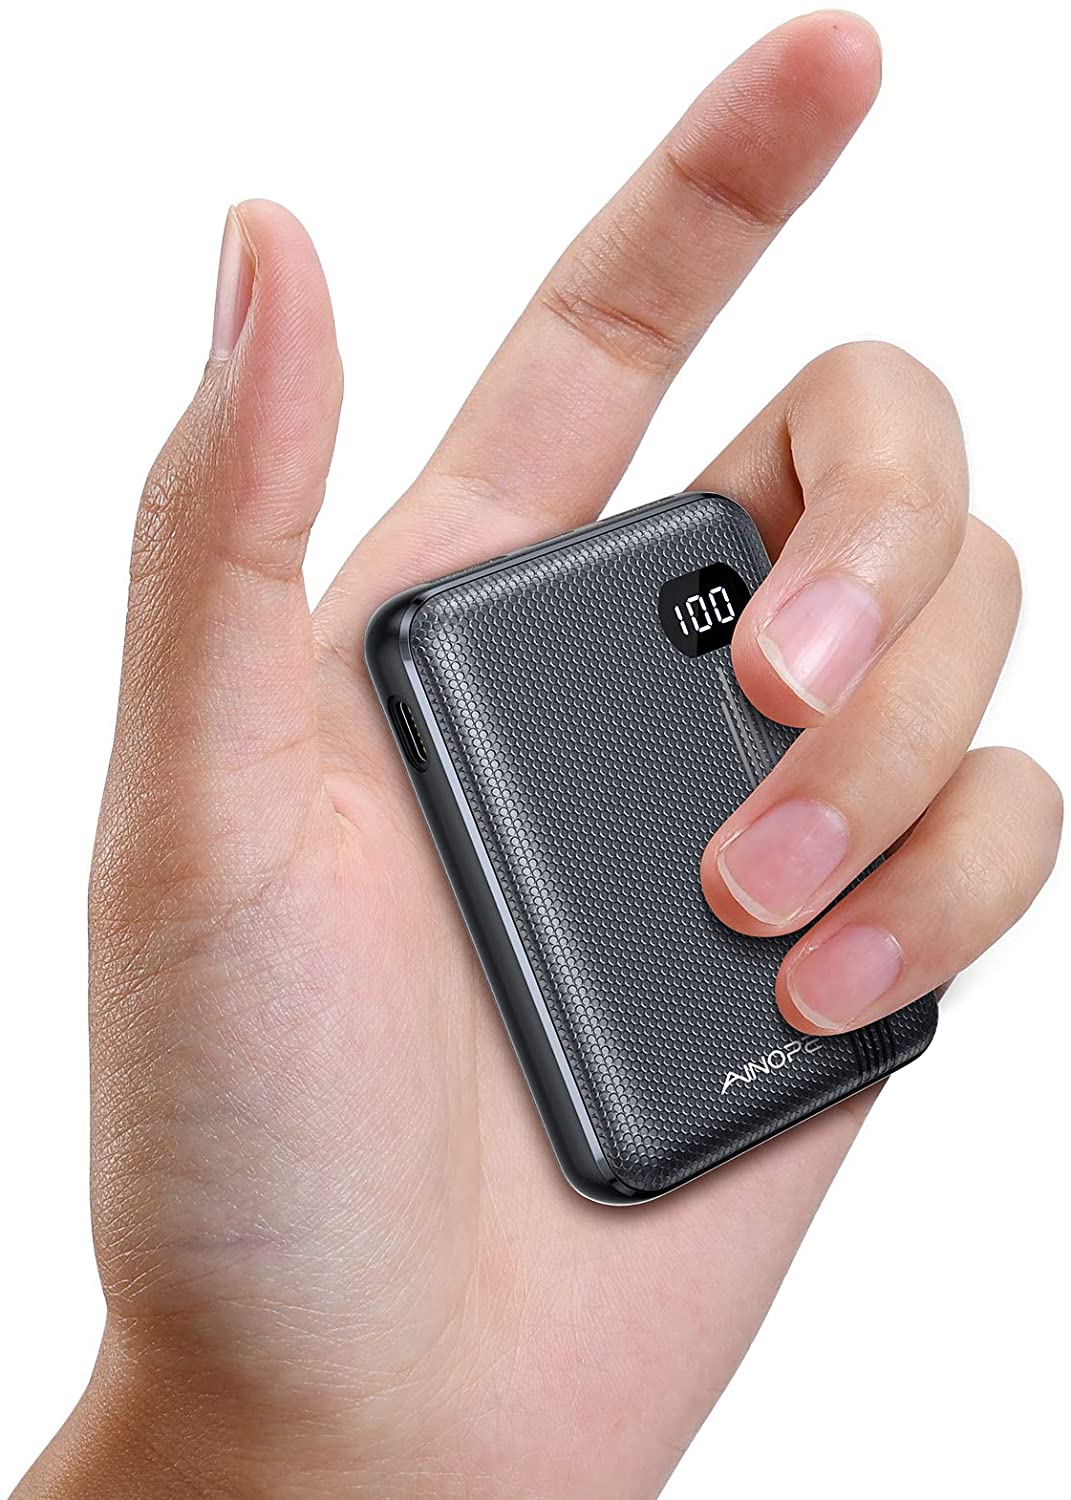 handheld portable battery charger